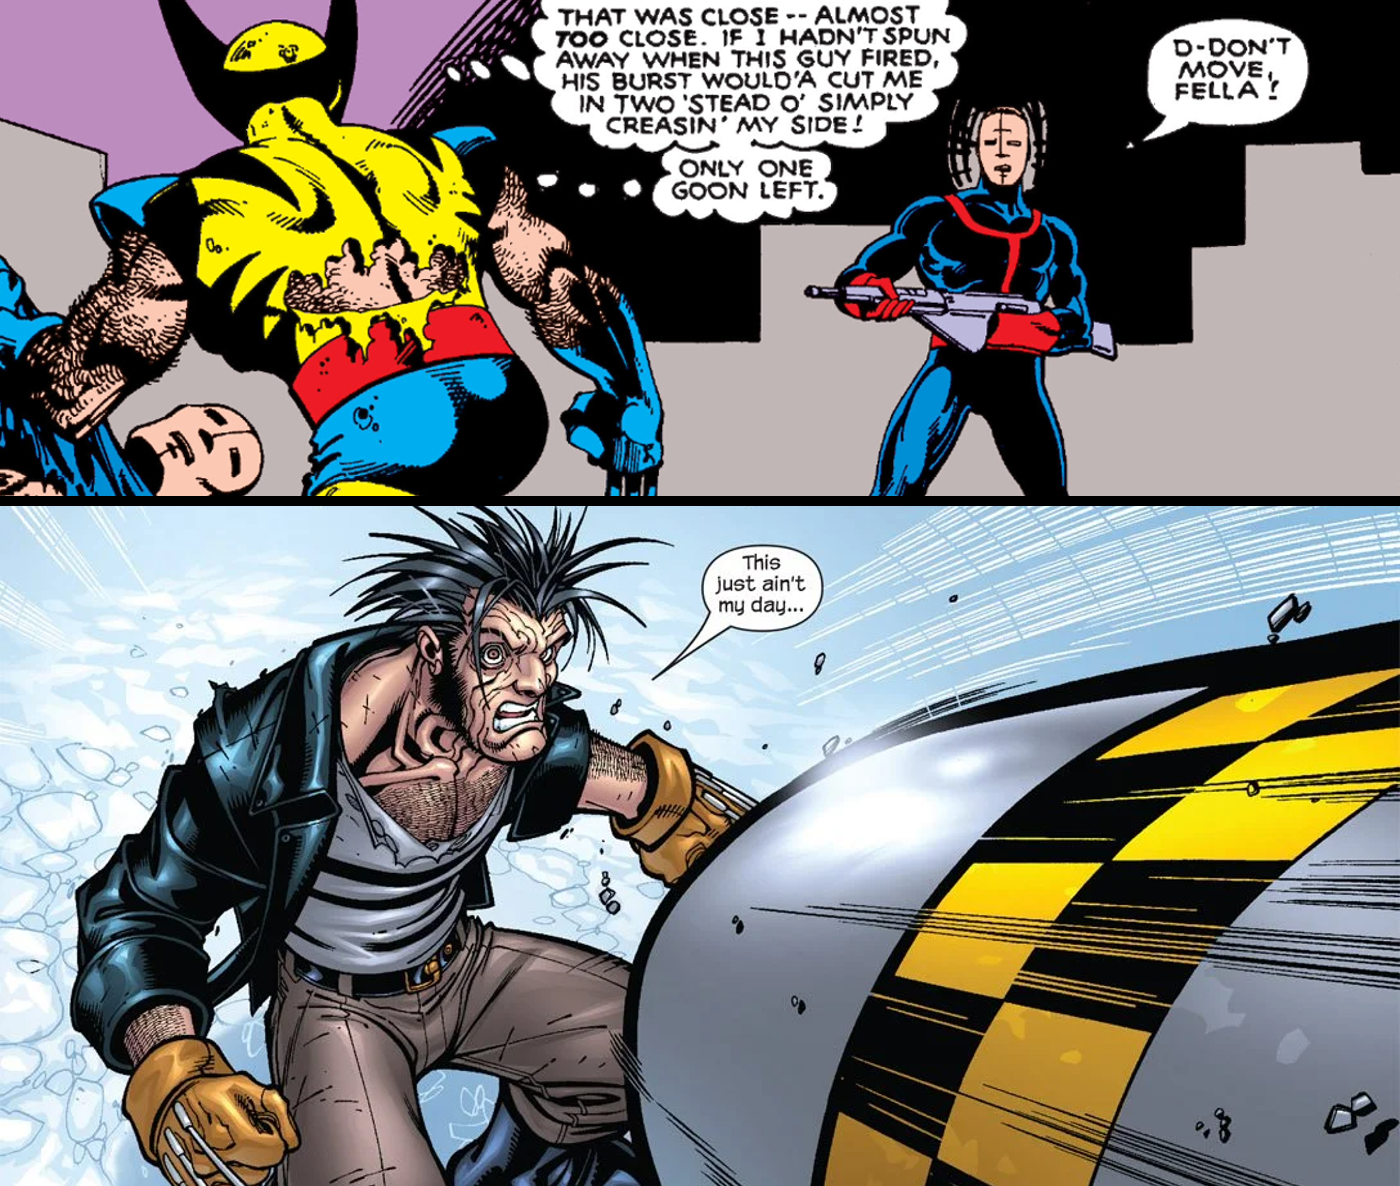 Wolverine Healing Factor power Difference over time